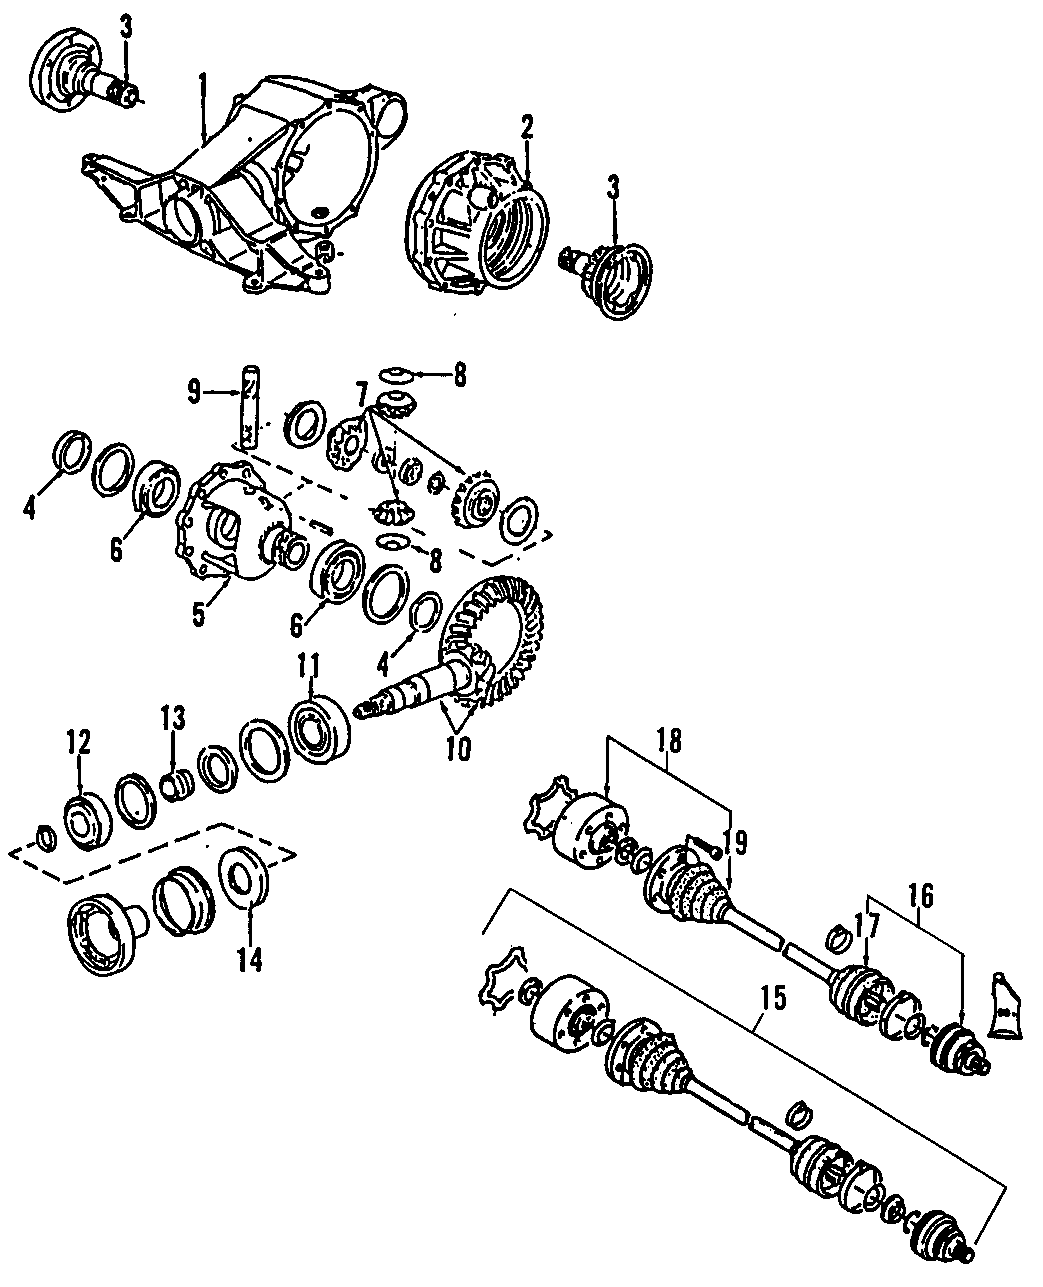 6DRIVE AXLES. REAR AXLE. AXLE SHAFTS & JOINTS. DIFFERENTIAL. PROPELLER SHAFT.https://images.simplepart.com/images/parts/motor/fullsize/E255240.png